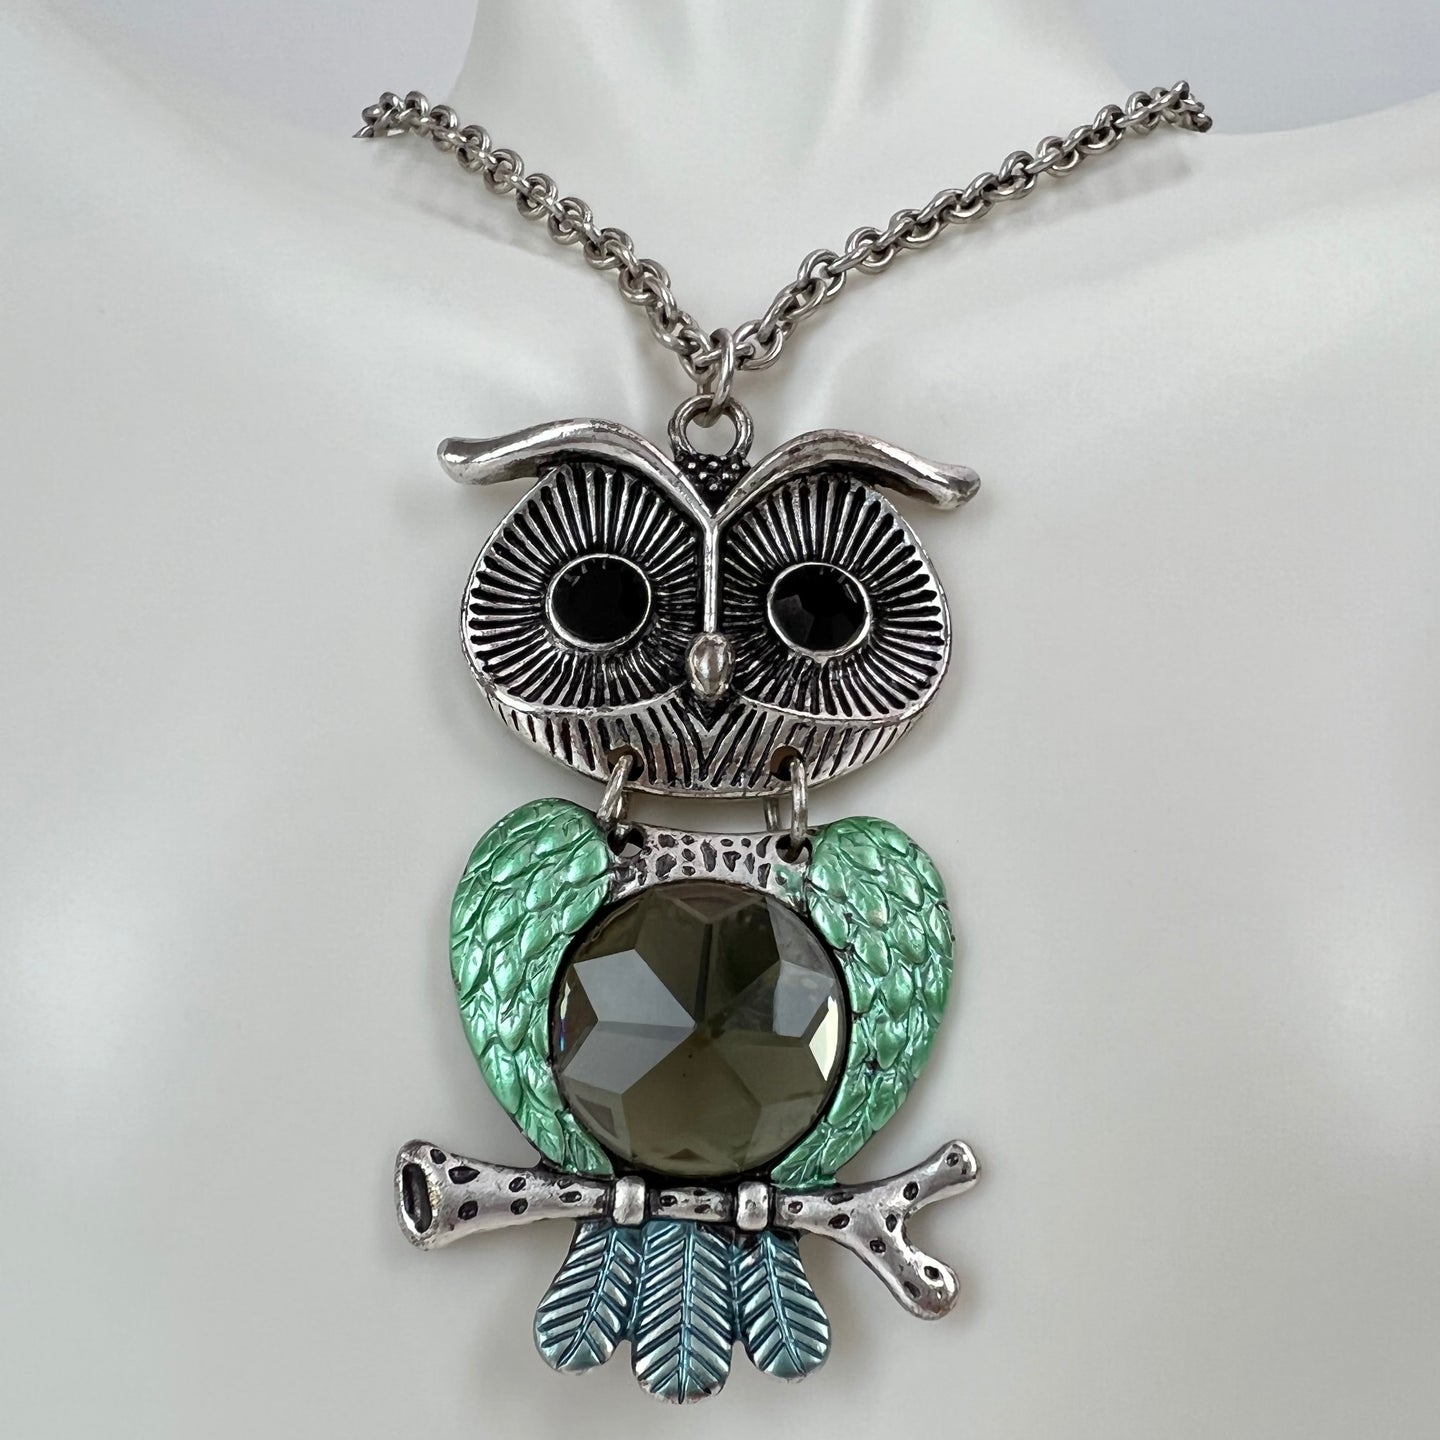 Vintage 70s Articulated Owl Pendant Silver Tone Metal Chain Necklace 